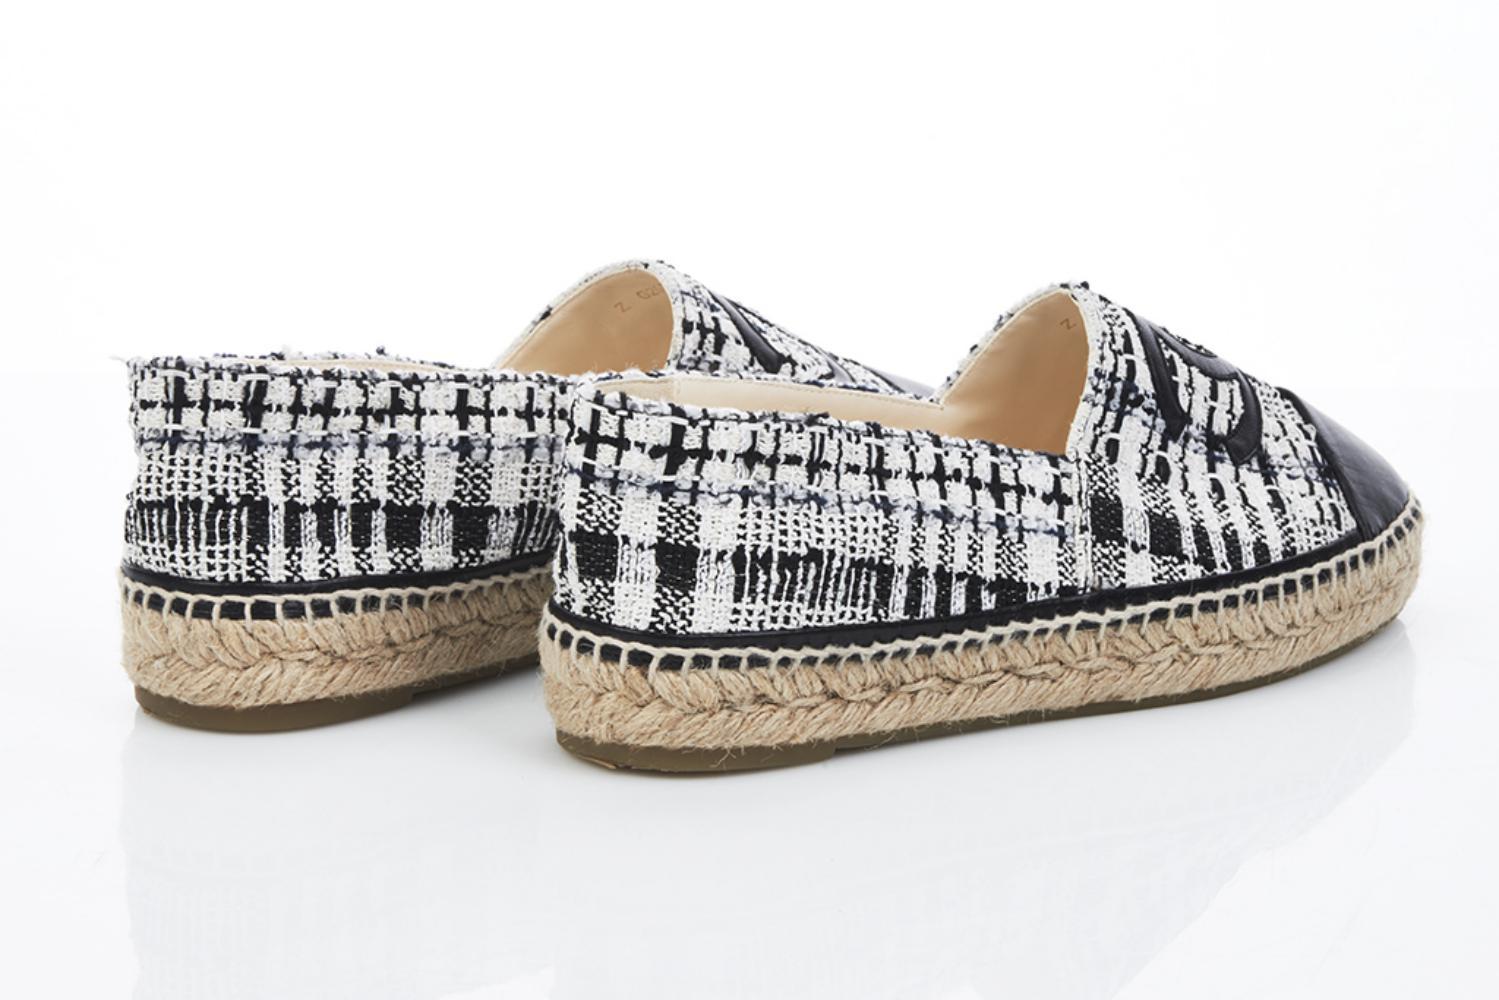 Chanel Black and White Tweed Espadrilles with Metallic Thread